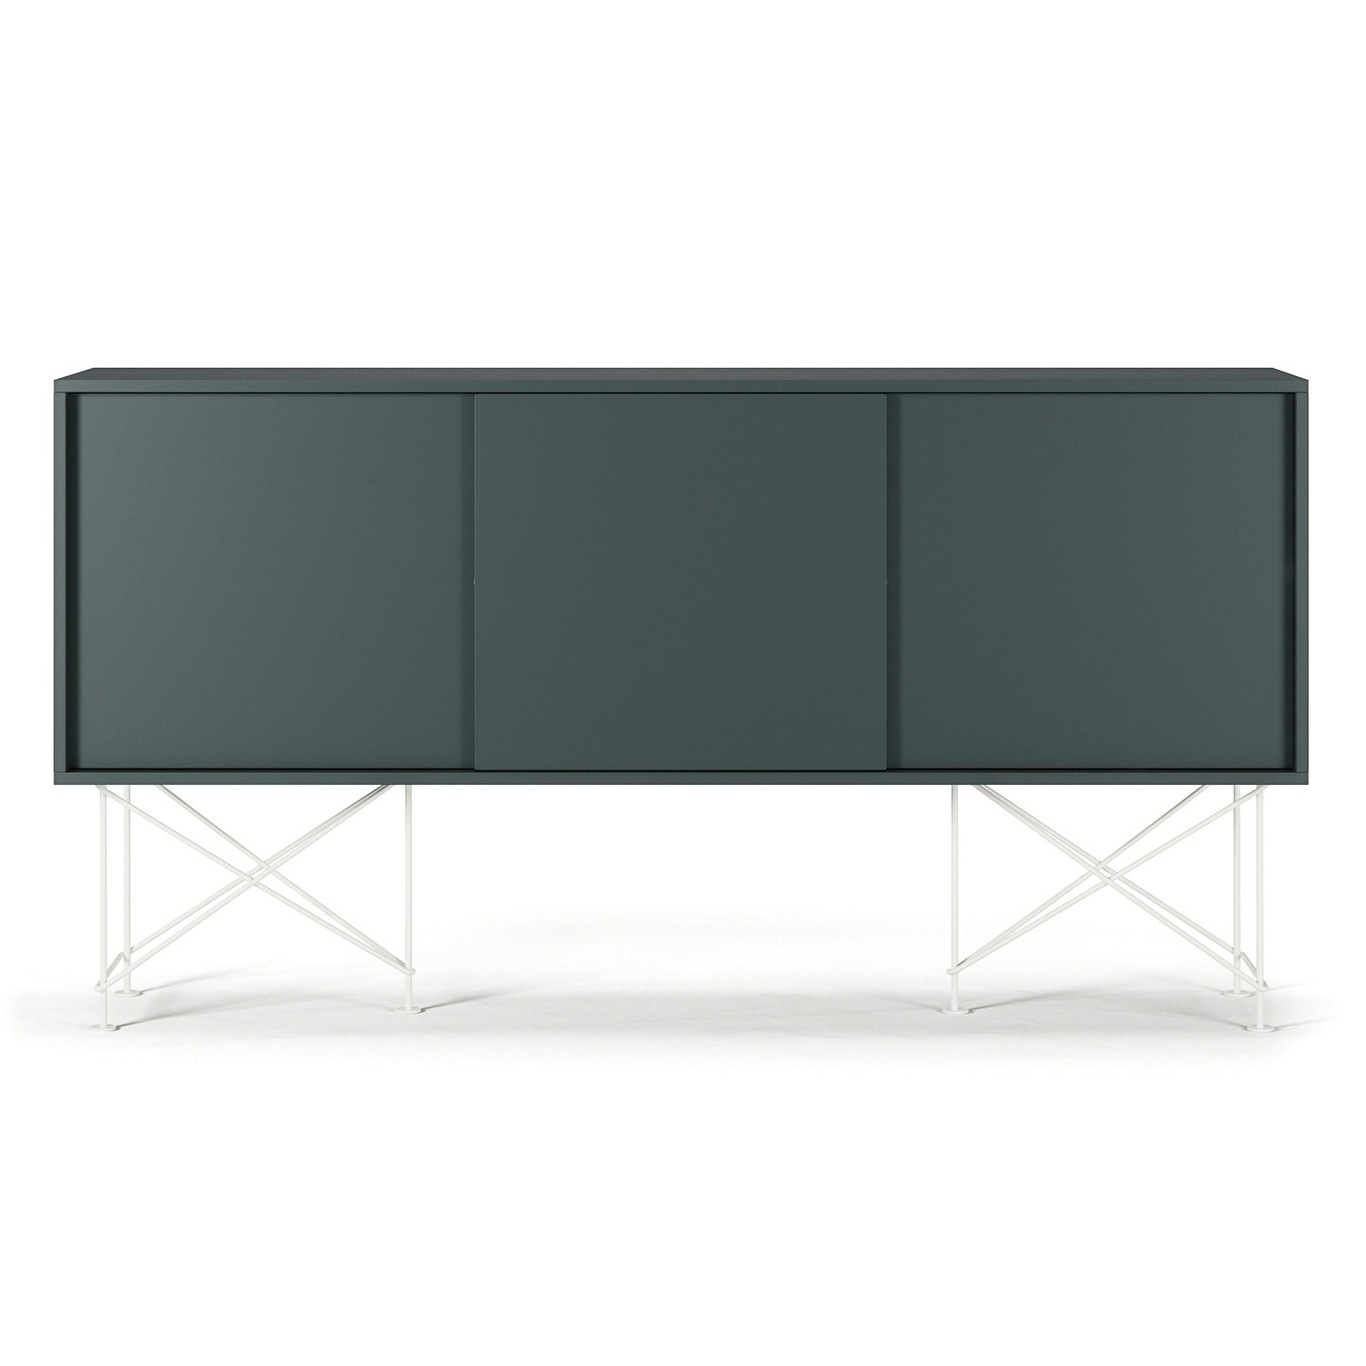 Vogue Sideboard With Stand 180 cm, Grey / White